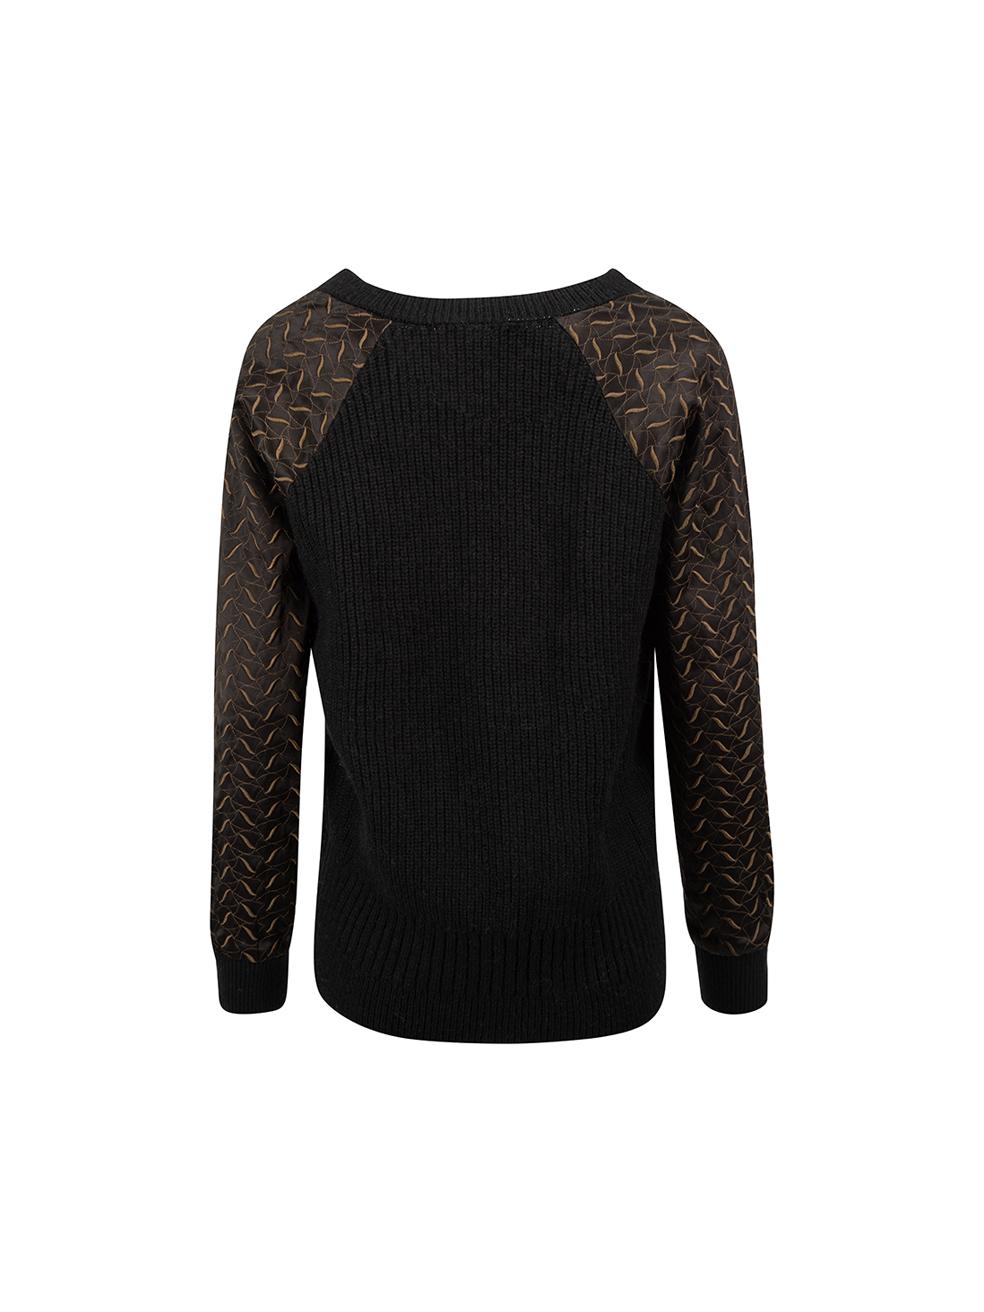 Black Wool Embroidered Sleeve Knit Jumper Size XS In Good Condition For Sale In London, GB